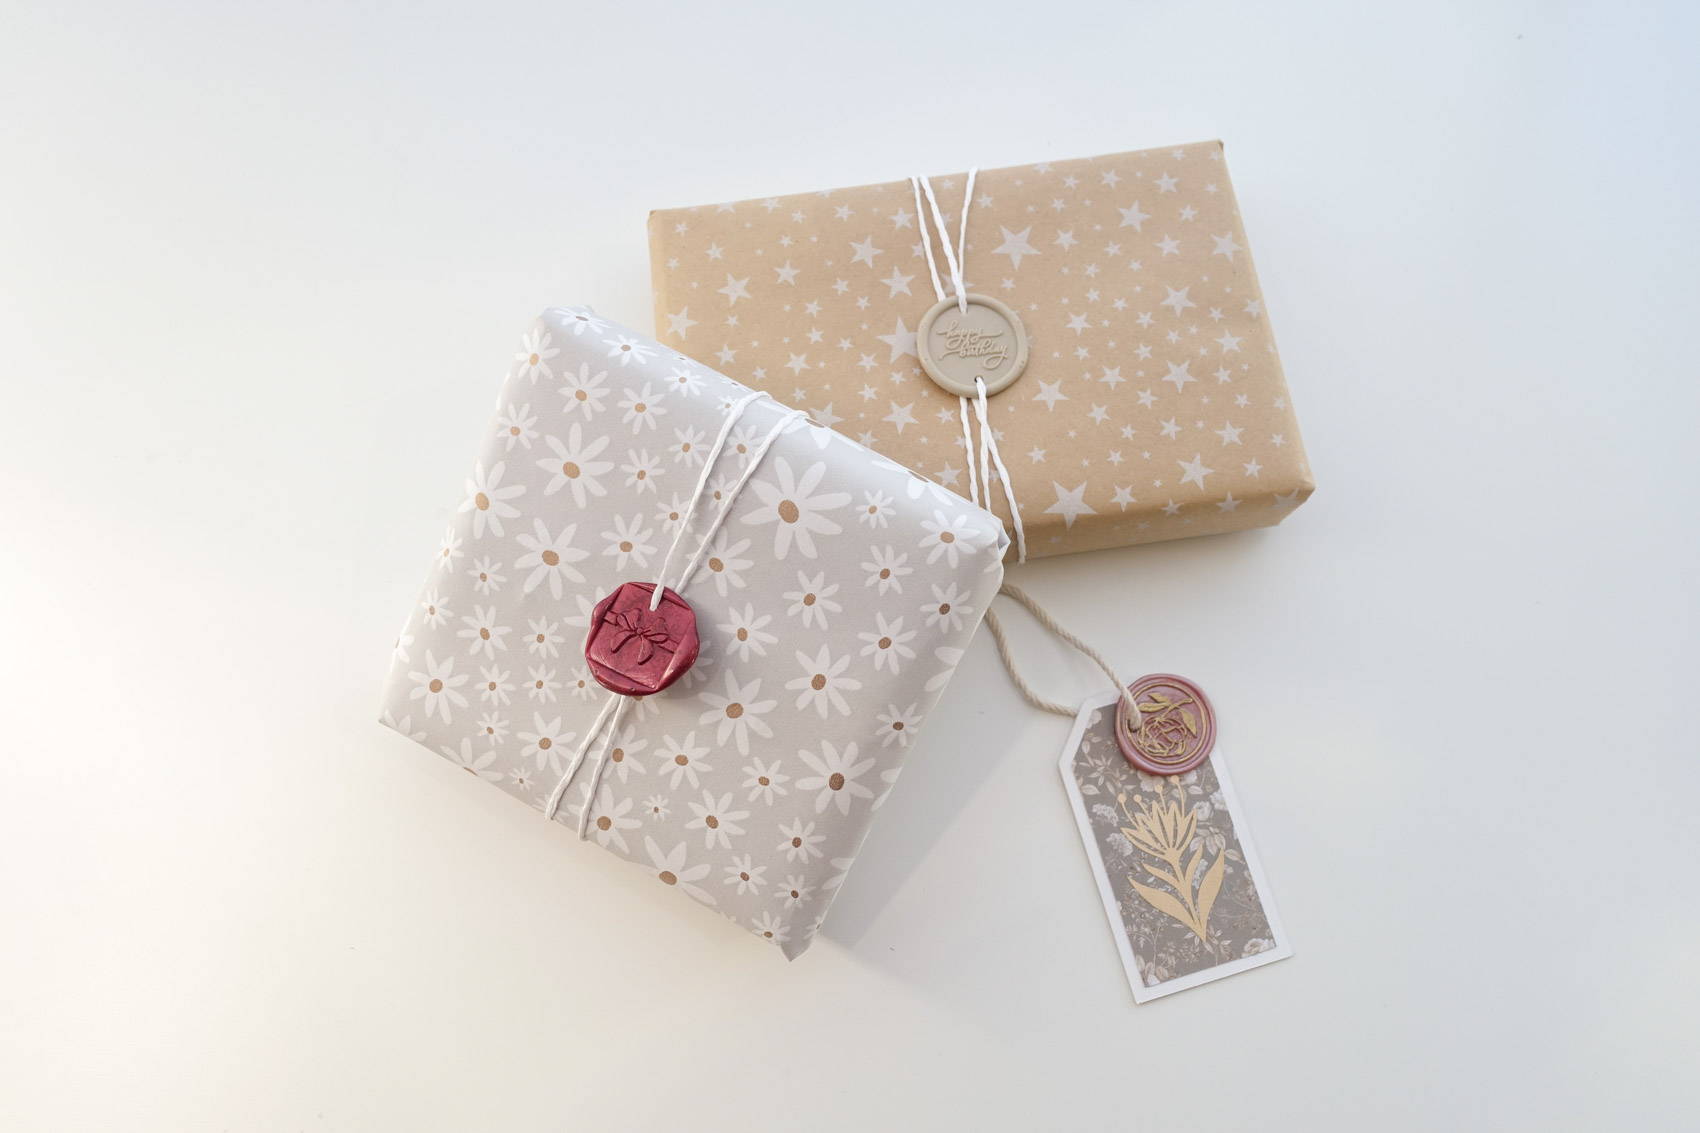 How To Make Wax Seal Charms: Gift Wrapping Idea